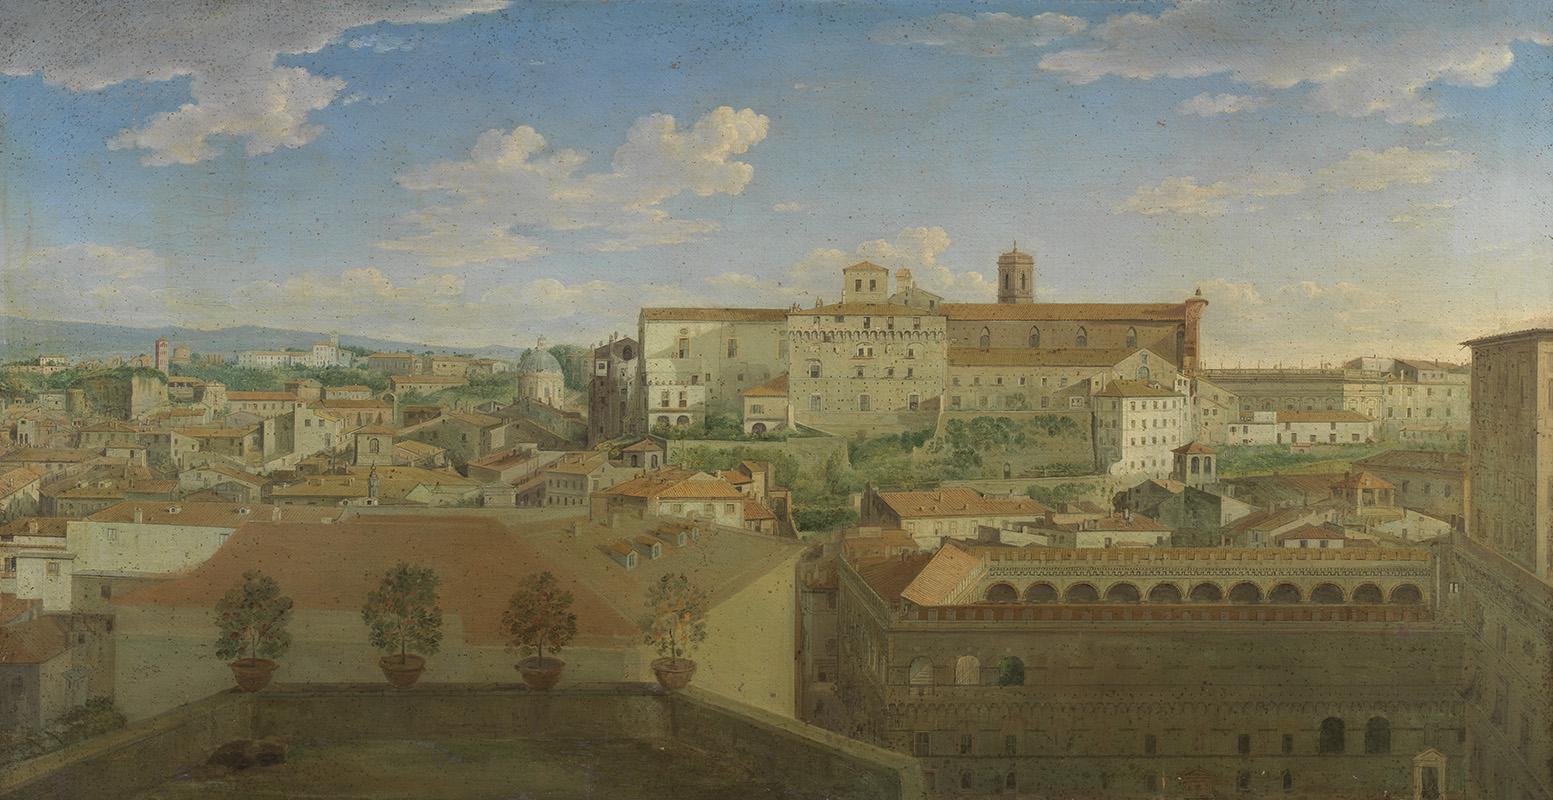 View of Piazza Venezia, Hendrik Frans Van Lint, oil on canvas, 18th century, in the collection of the Museum of Palazzo Venezia. Shown from what is now Via del Corso, the Capitoline Hill is in the background and Palazzo Venezia can be seen on the lower right.
